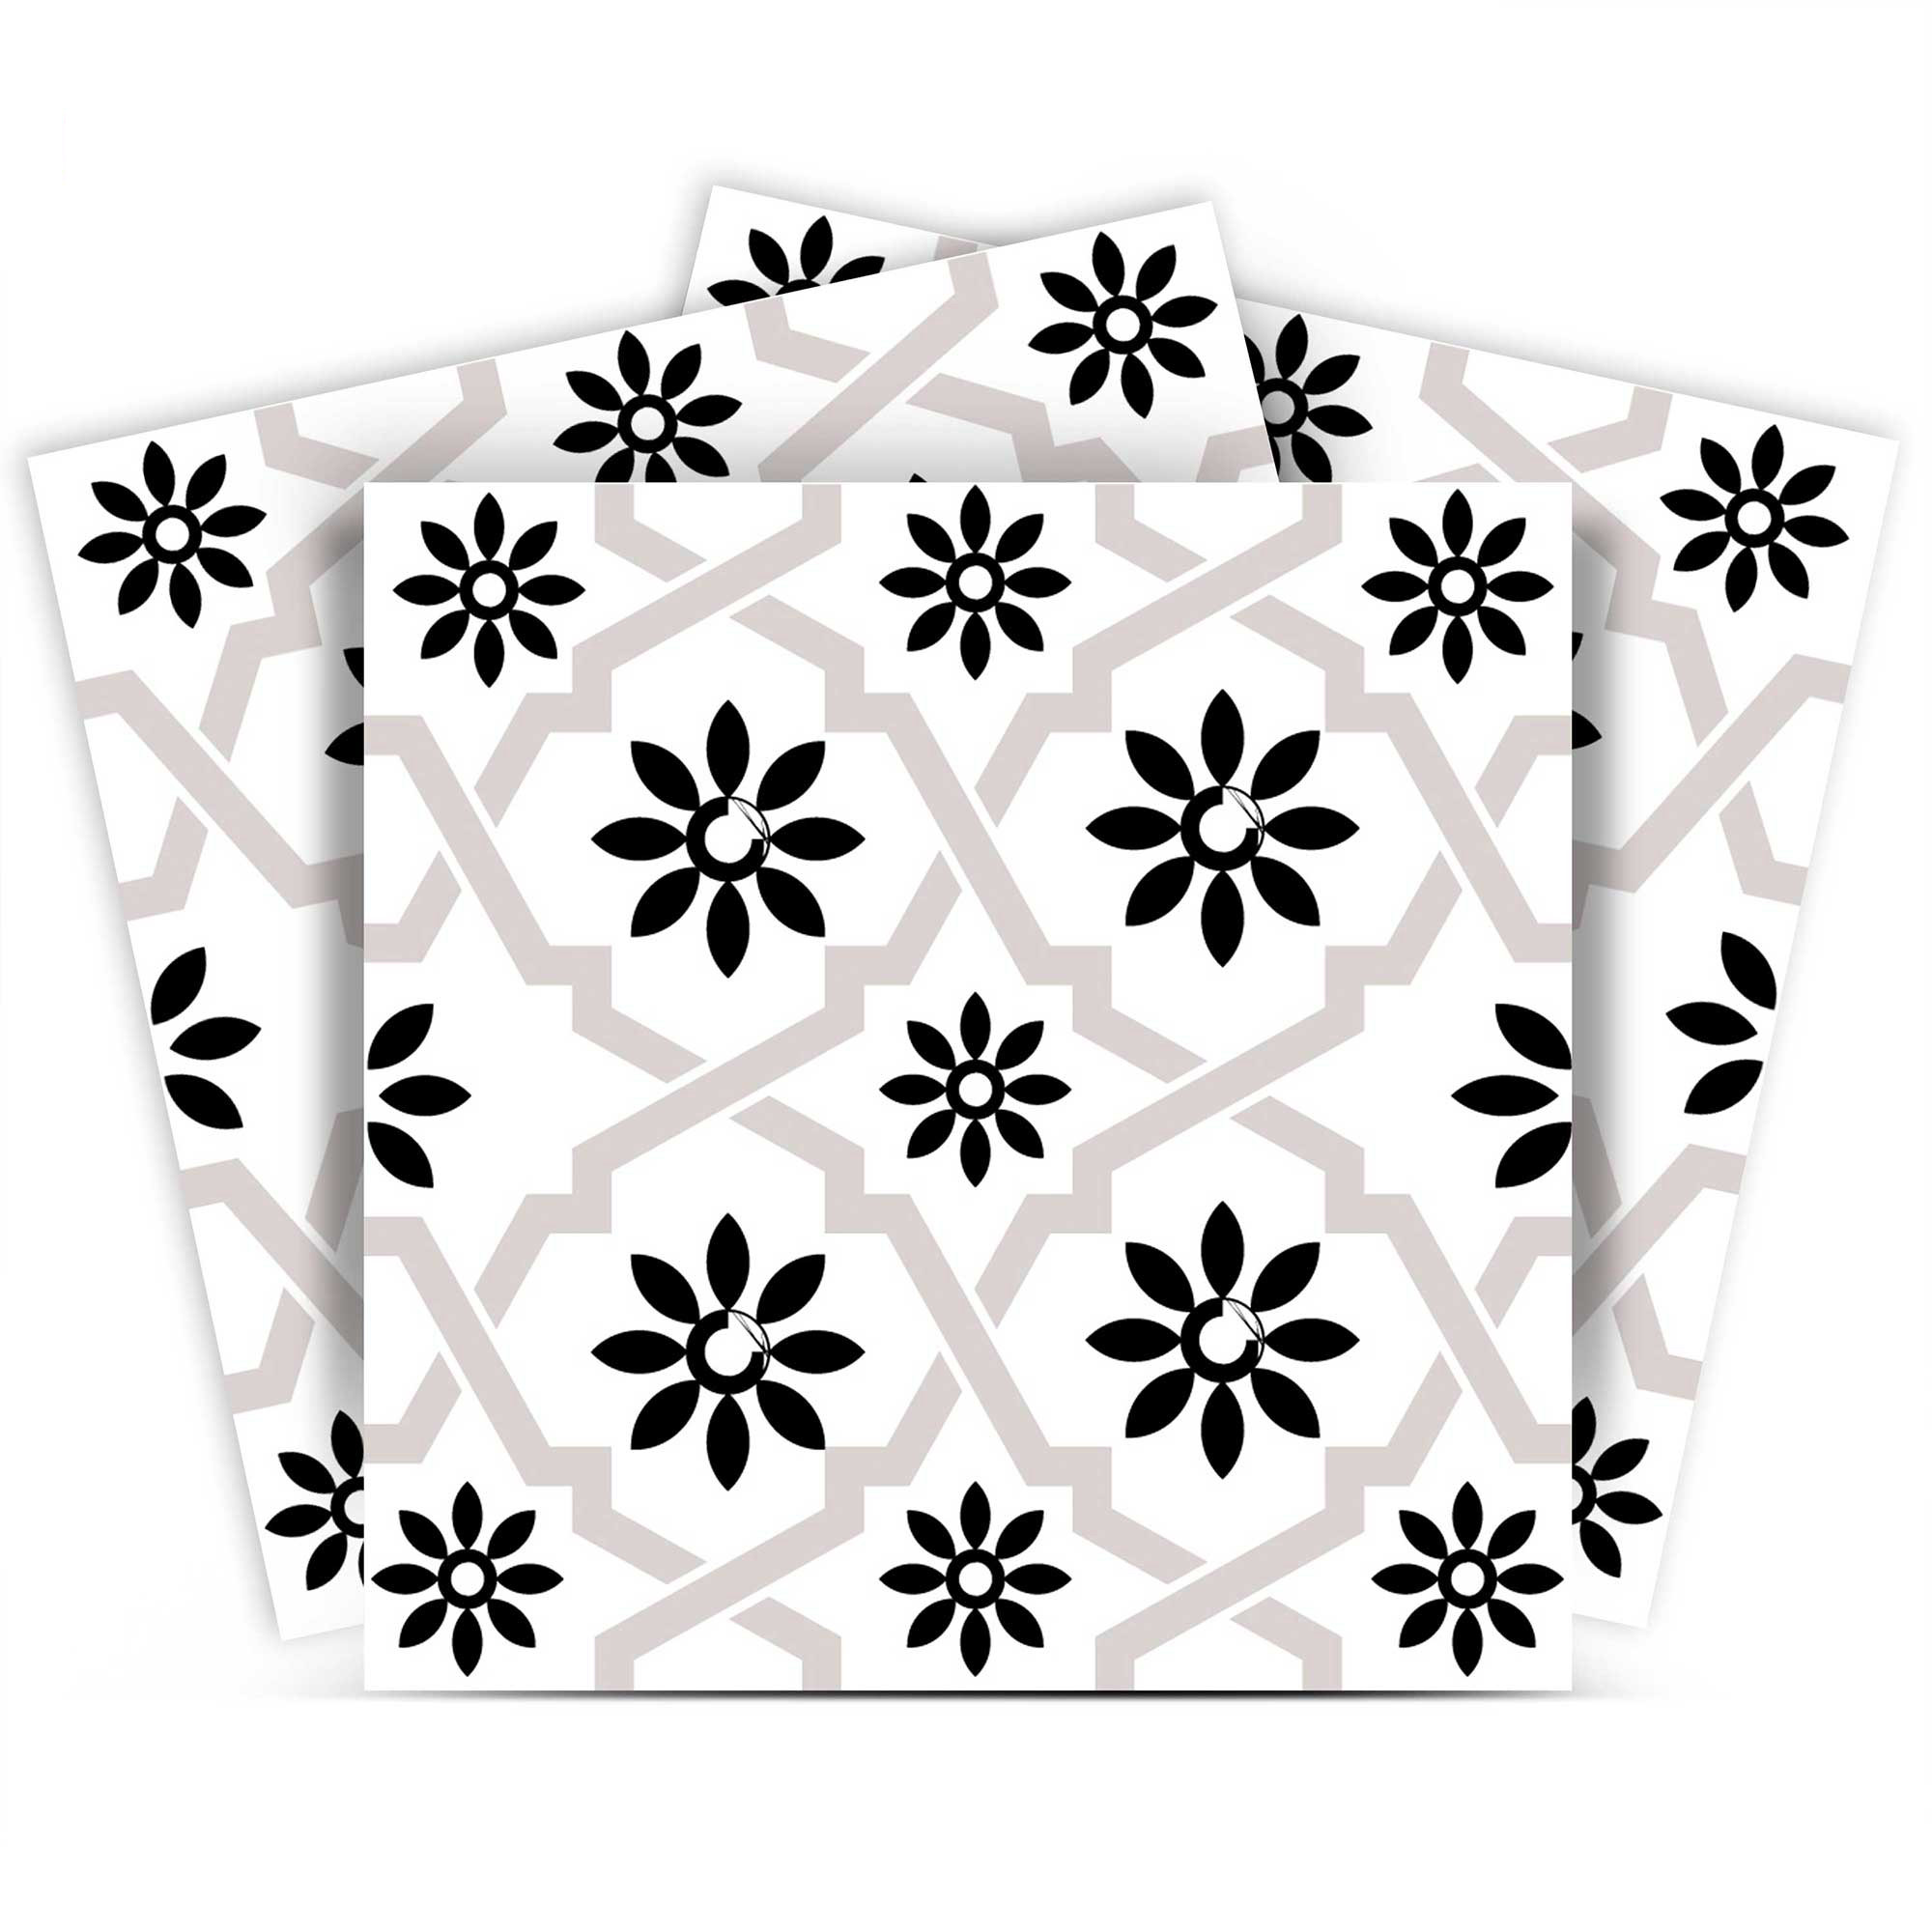 8" X 8" Black and White Lil  Daisy Peel and Stick Removable Tiles-399909-1